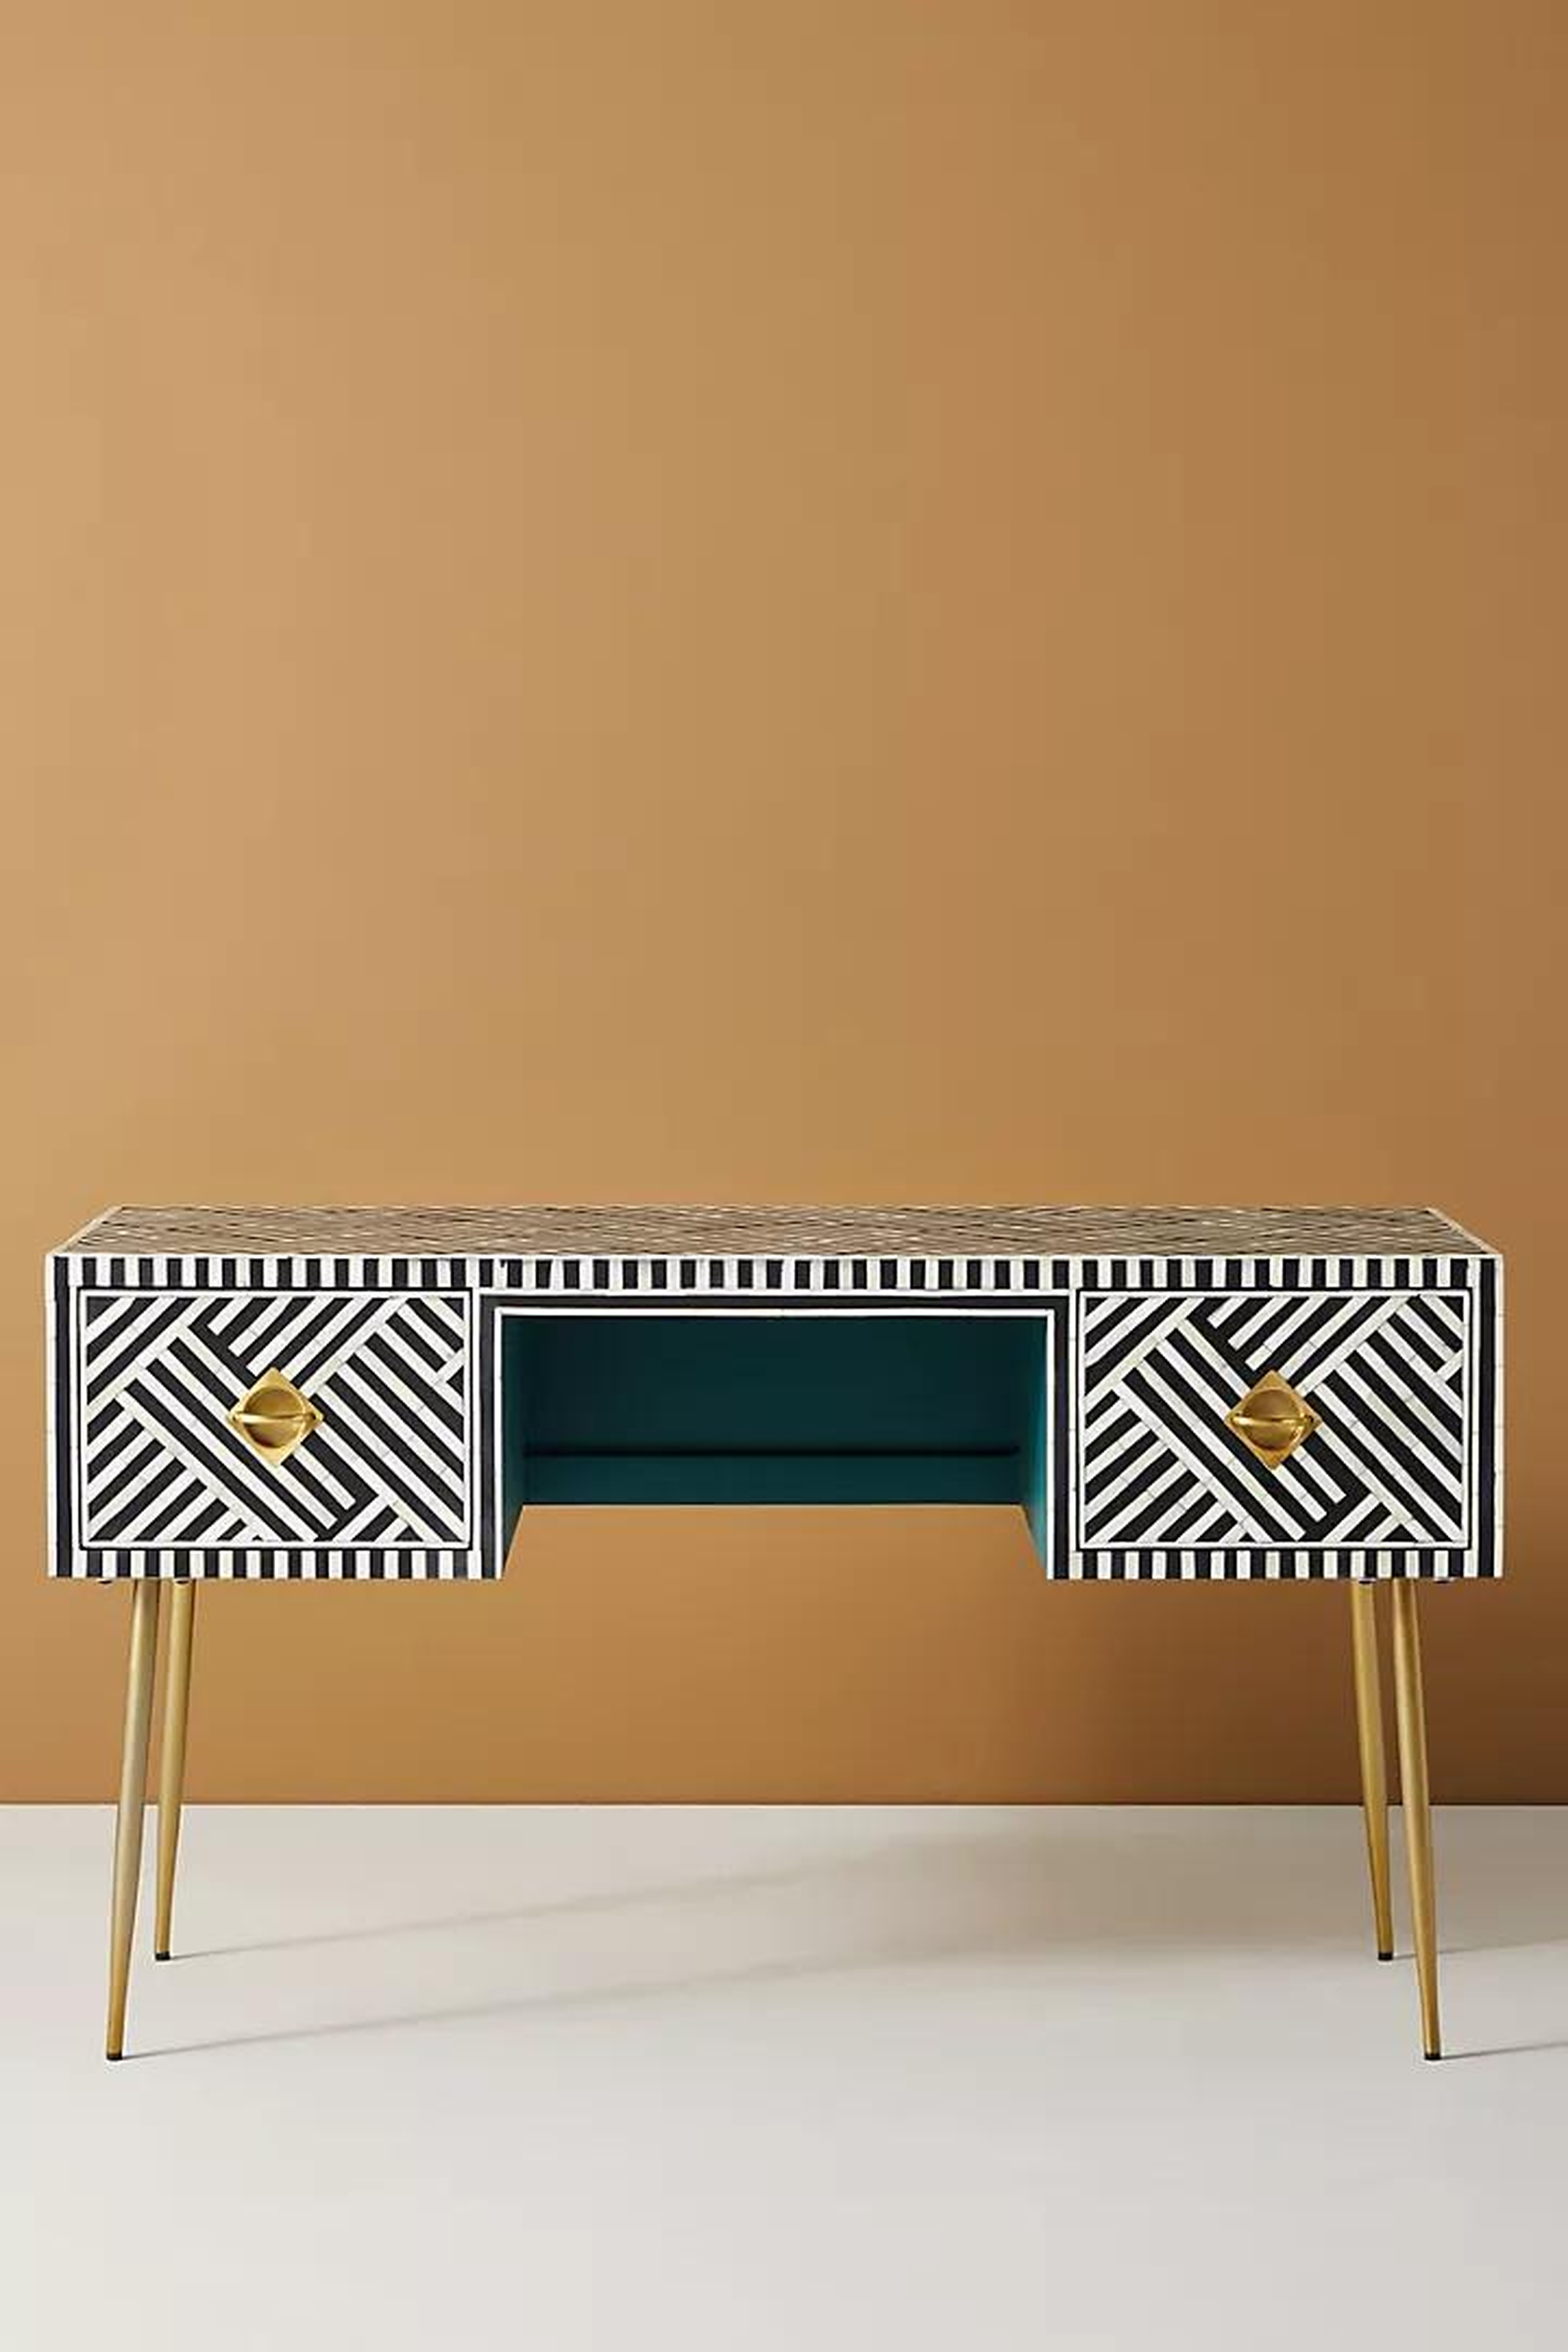 Optical Inlay Desk By Anthropologie in Black - Anthropologie